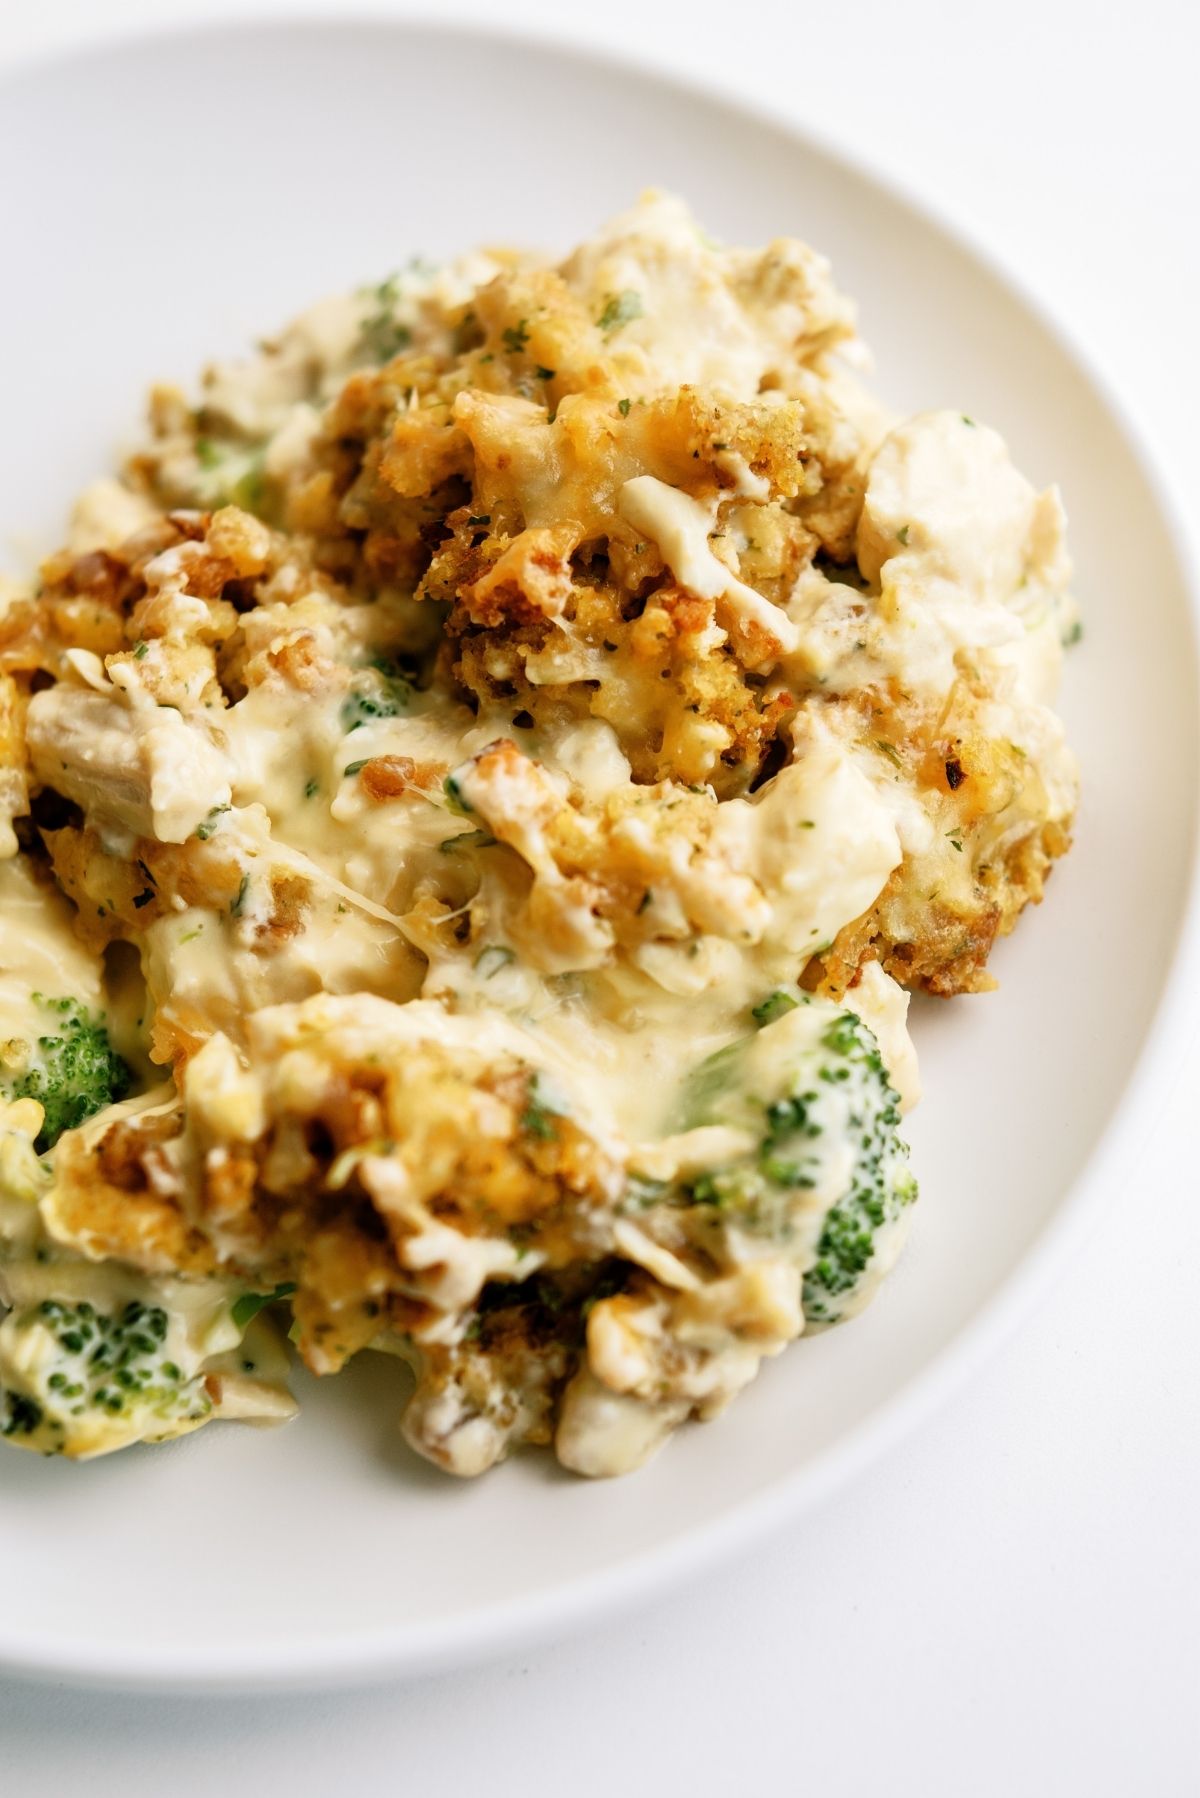 A serving of Chicken and Broccoli Stuffing Casserole on a plate